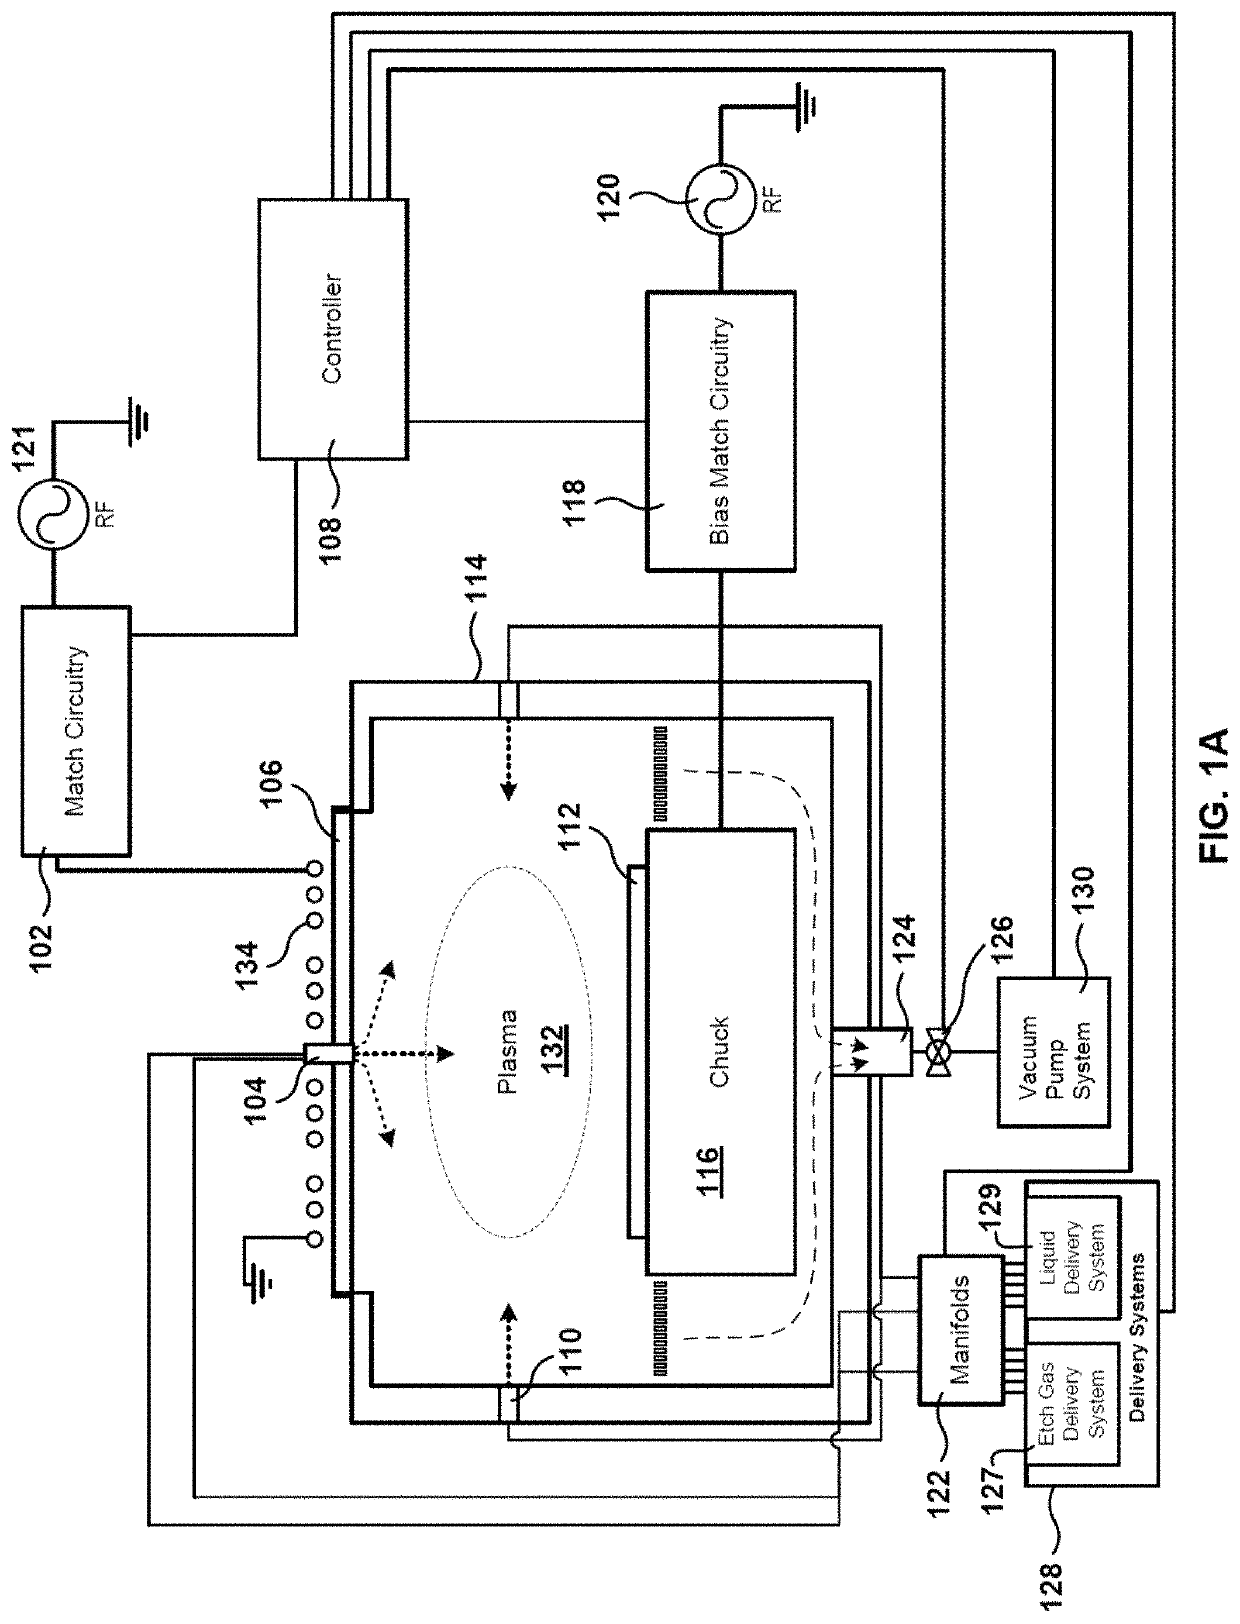 Vacuum pump protection against deposition byproduct buildup